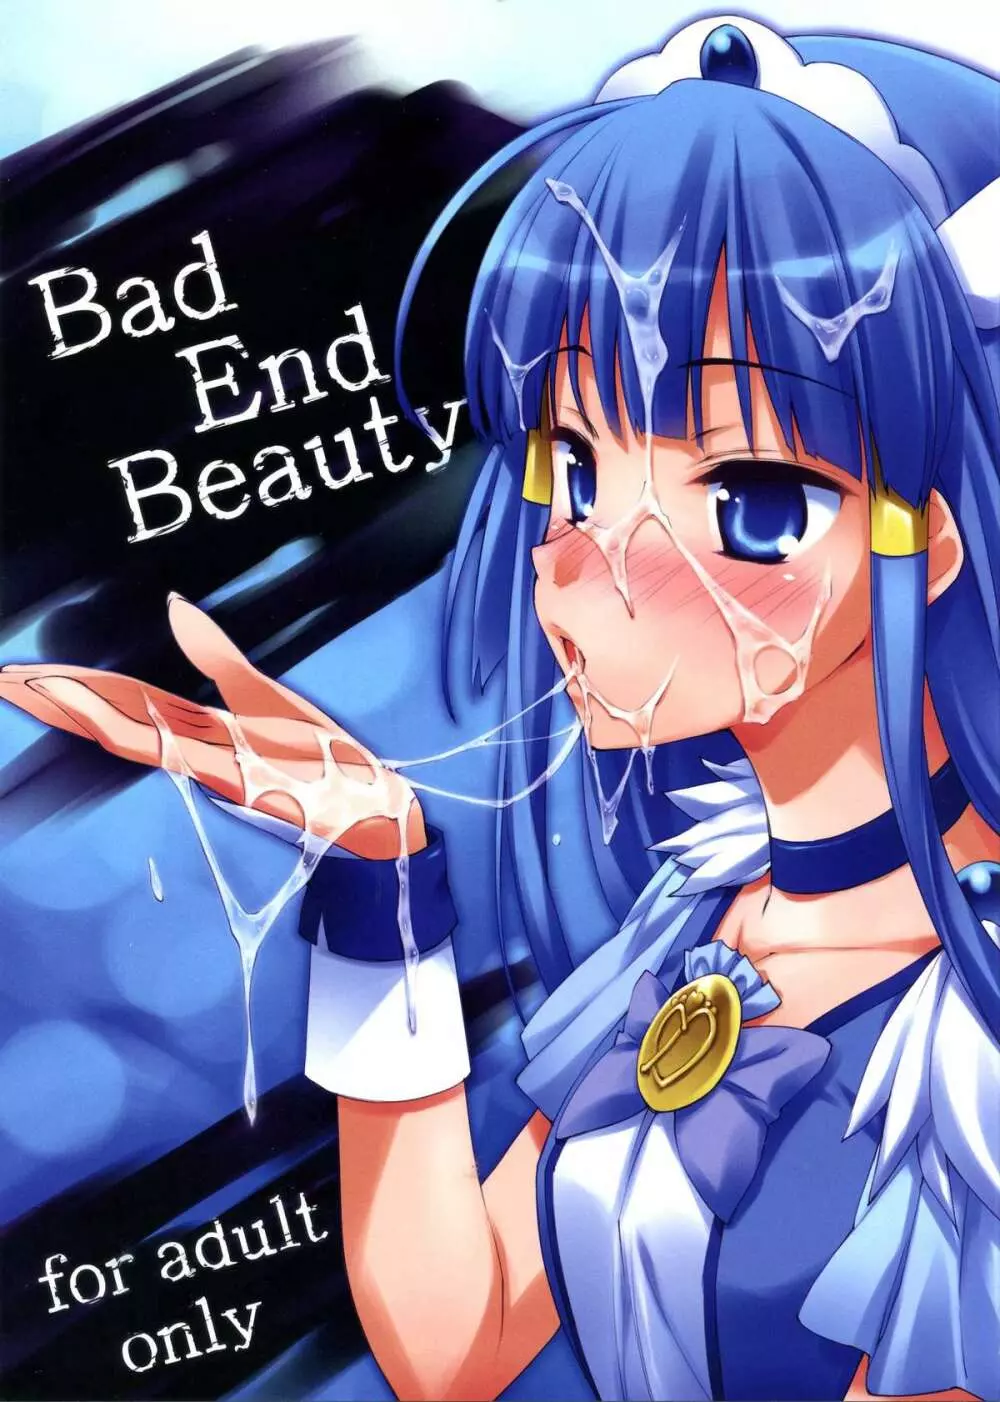 Bad End Beauty - page1